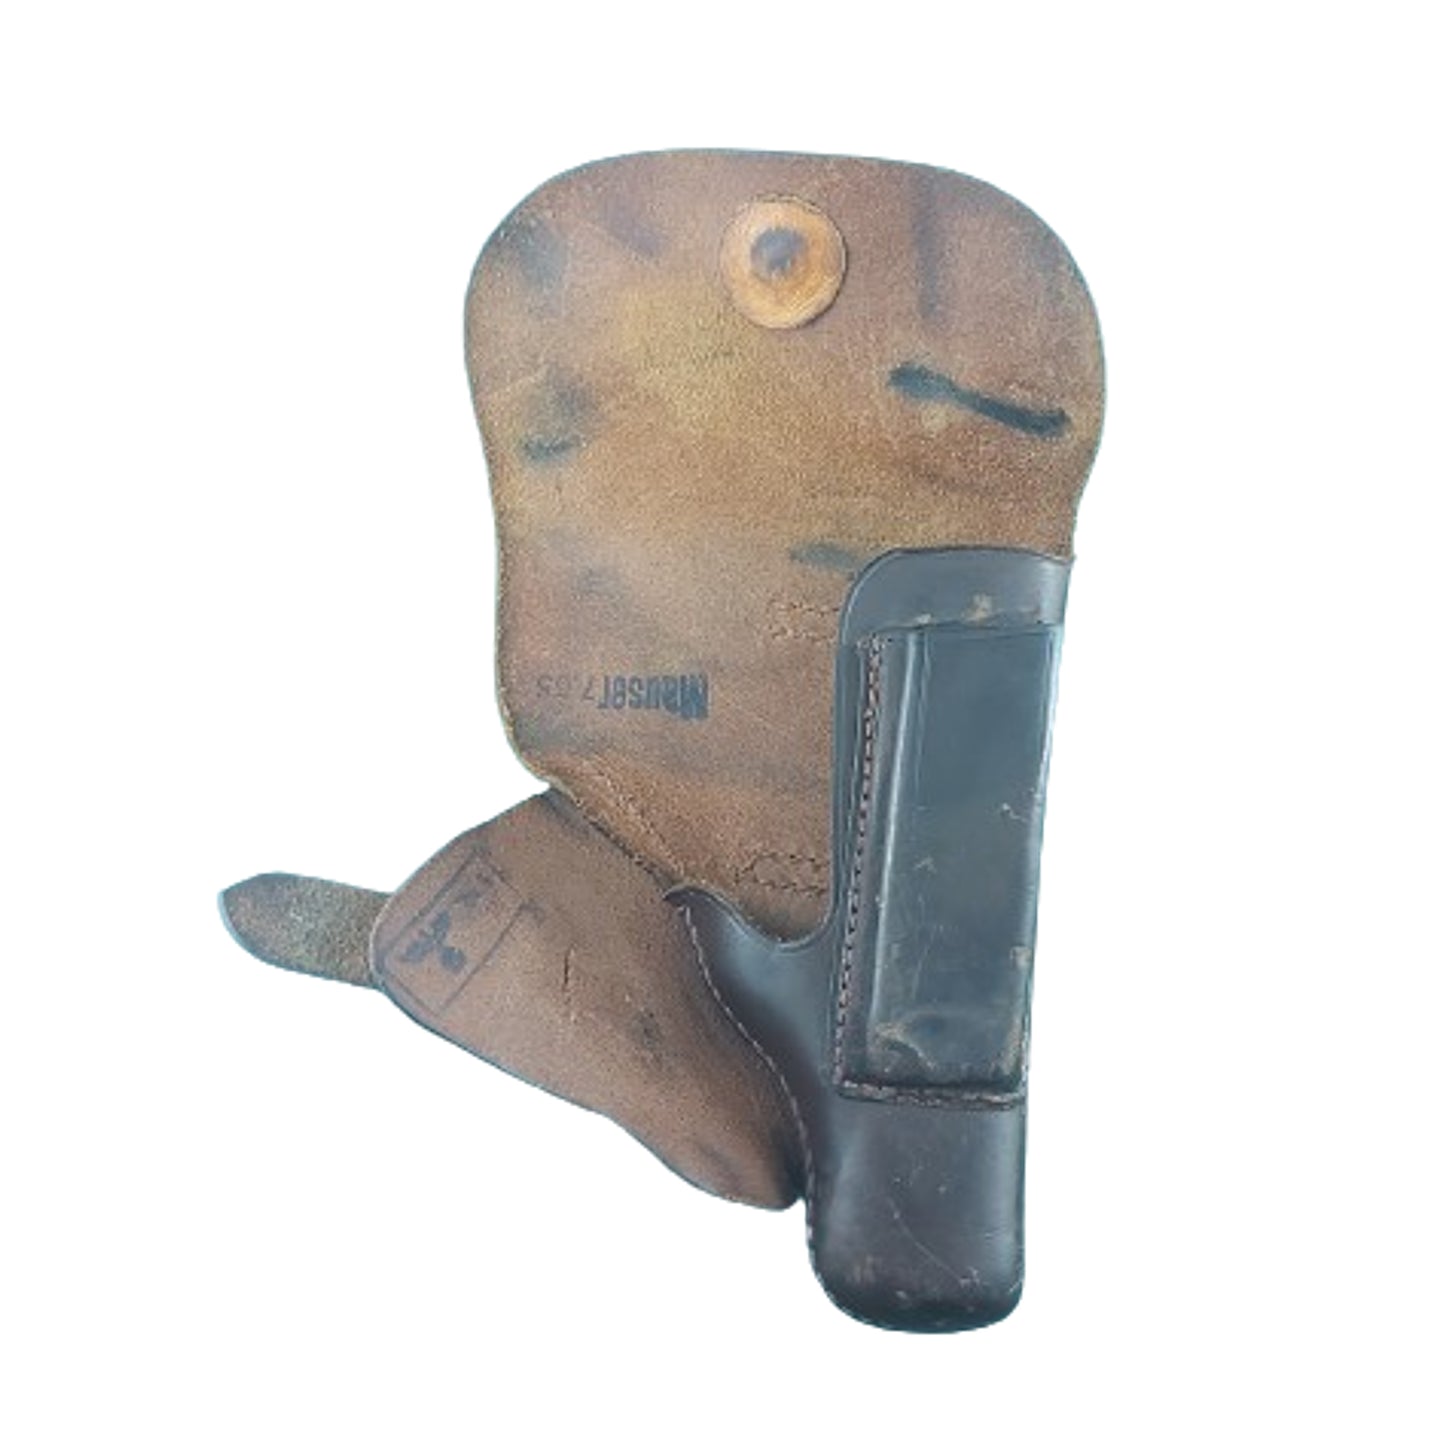 Deactivated WW2 German HSC Mauser Pistol With Marked Holster